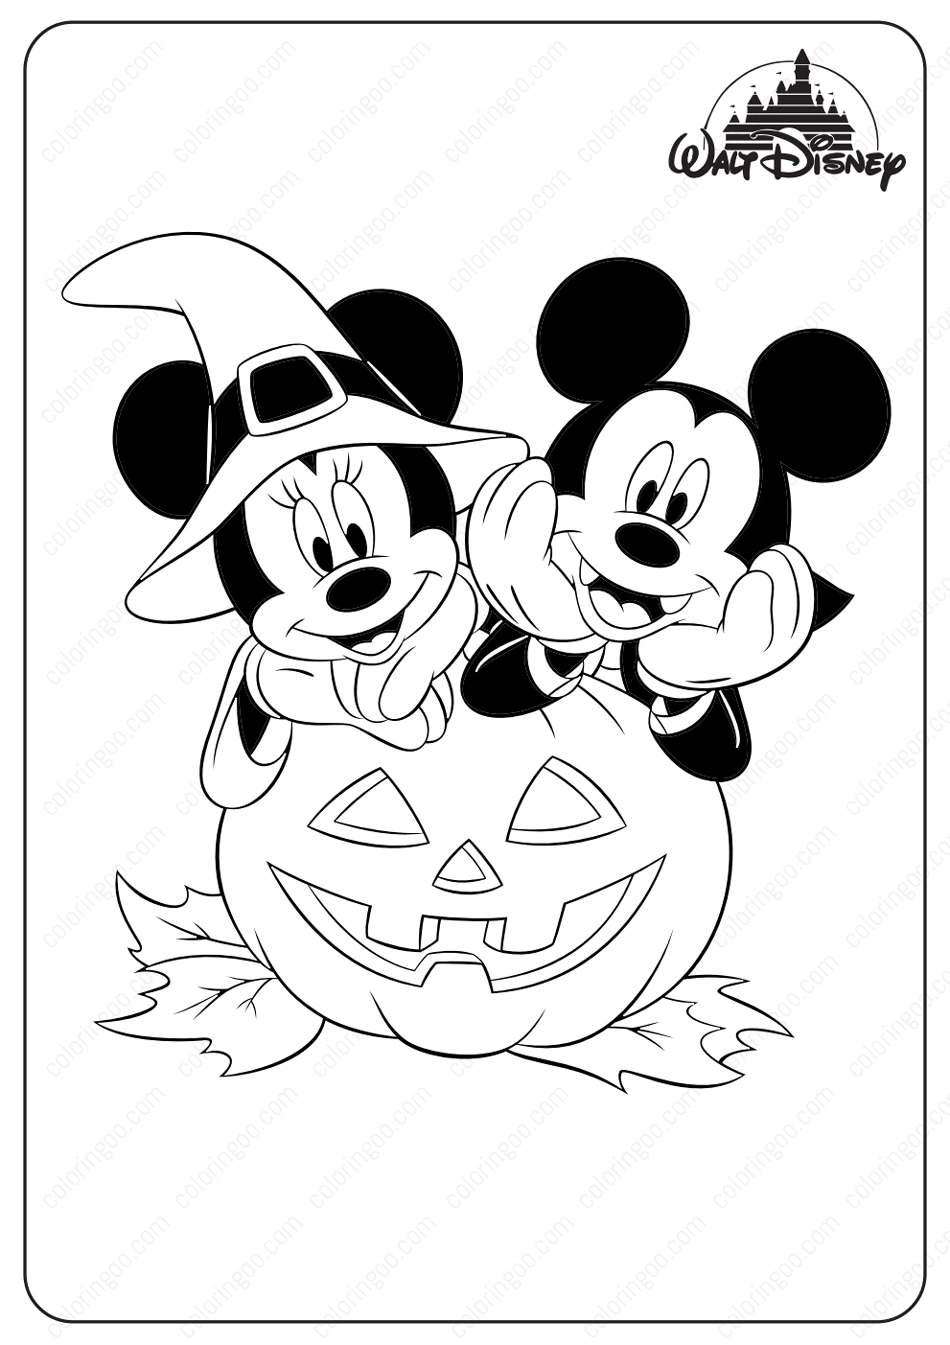 Disney Minnie & Mickey Halloween Coloring Pages